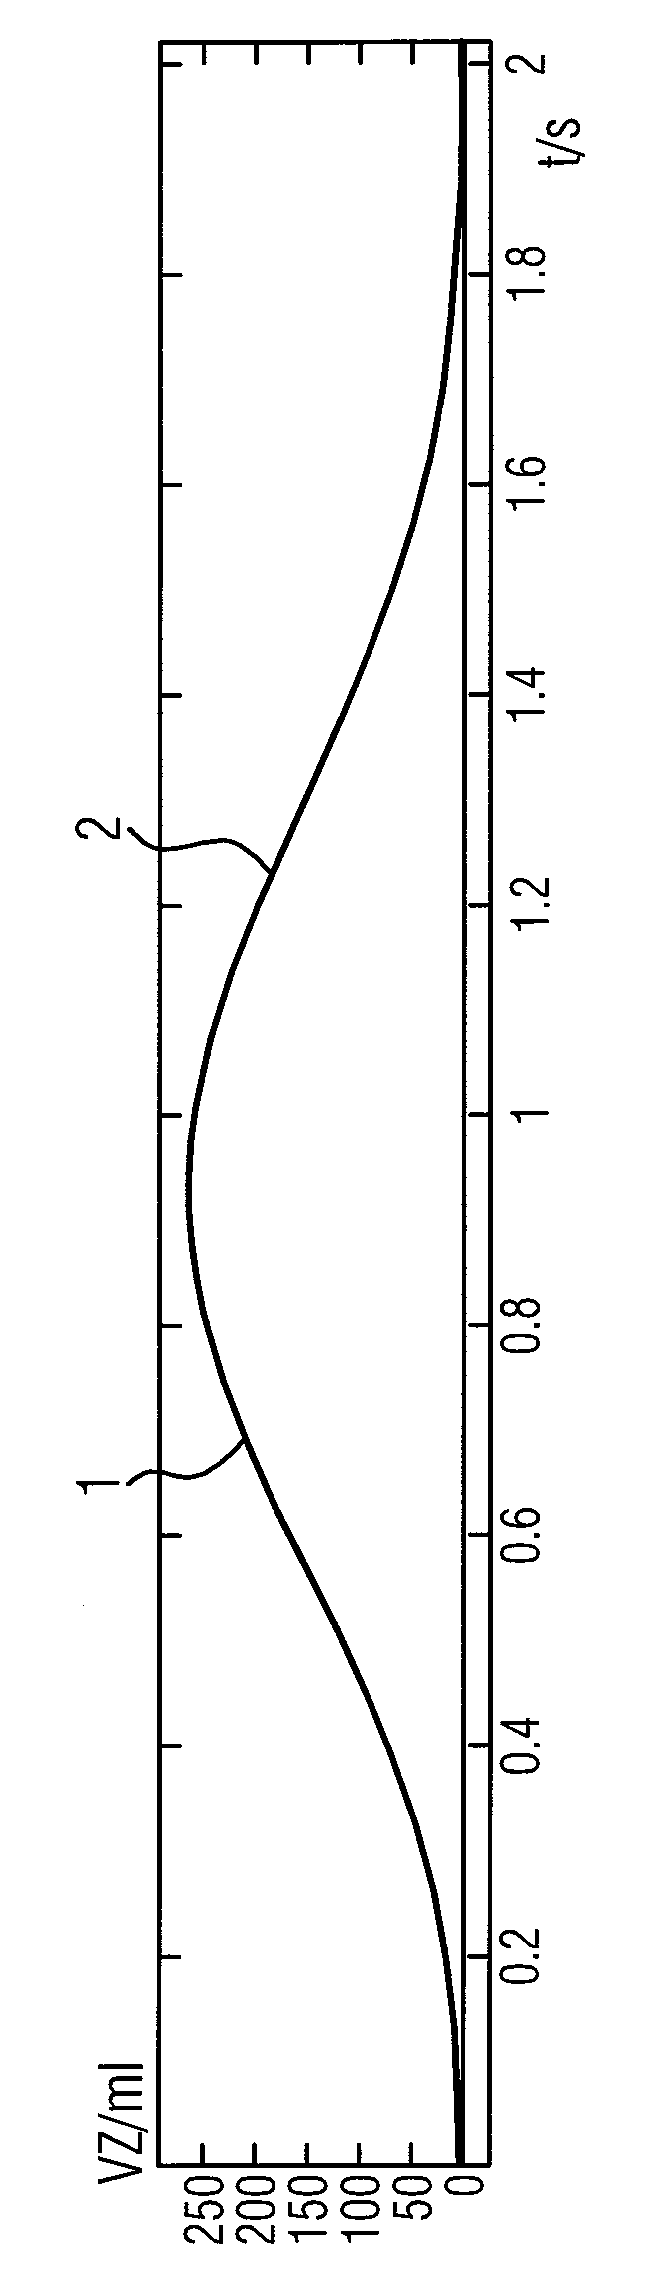 Electro-impedance Tomography Device And Method